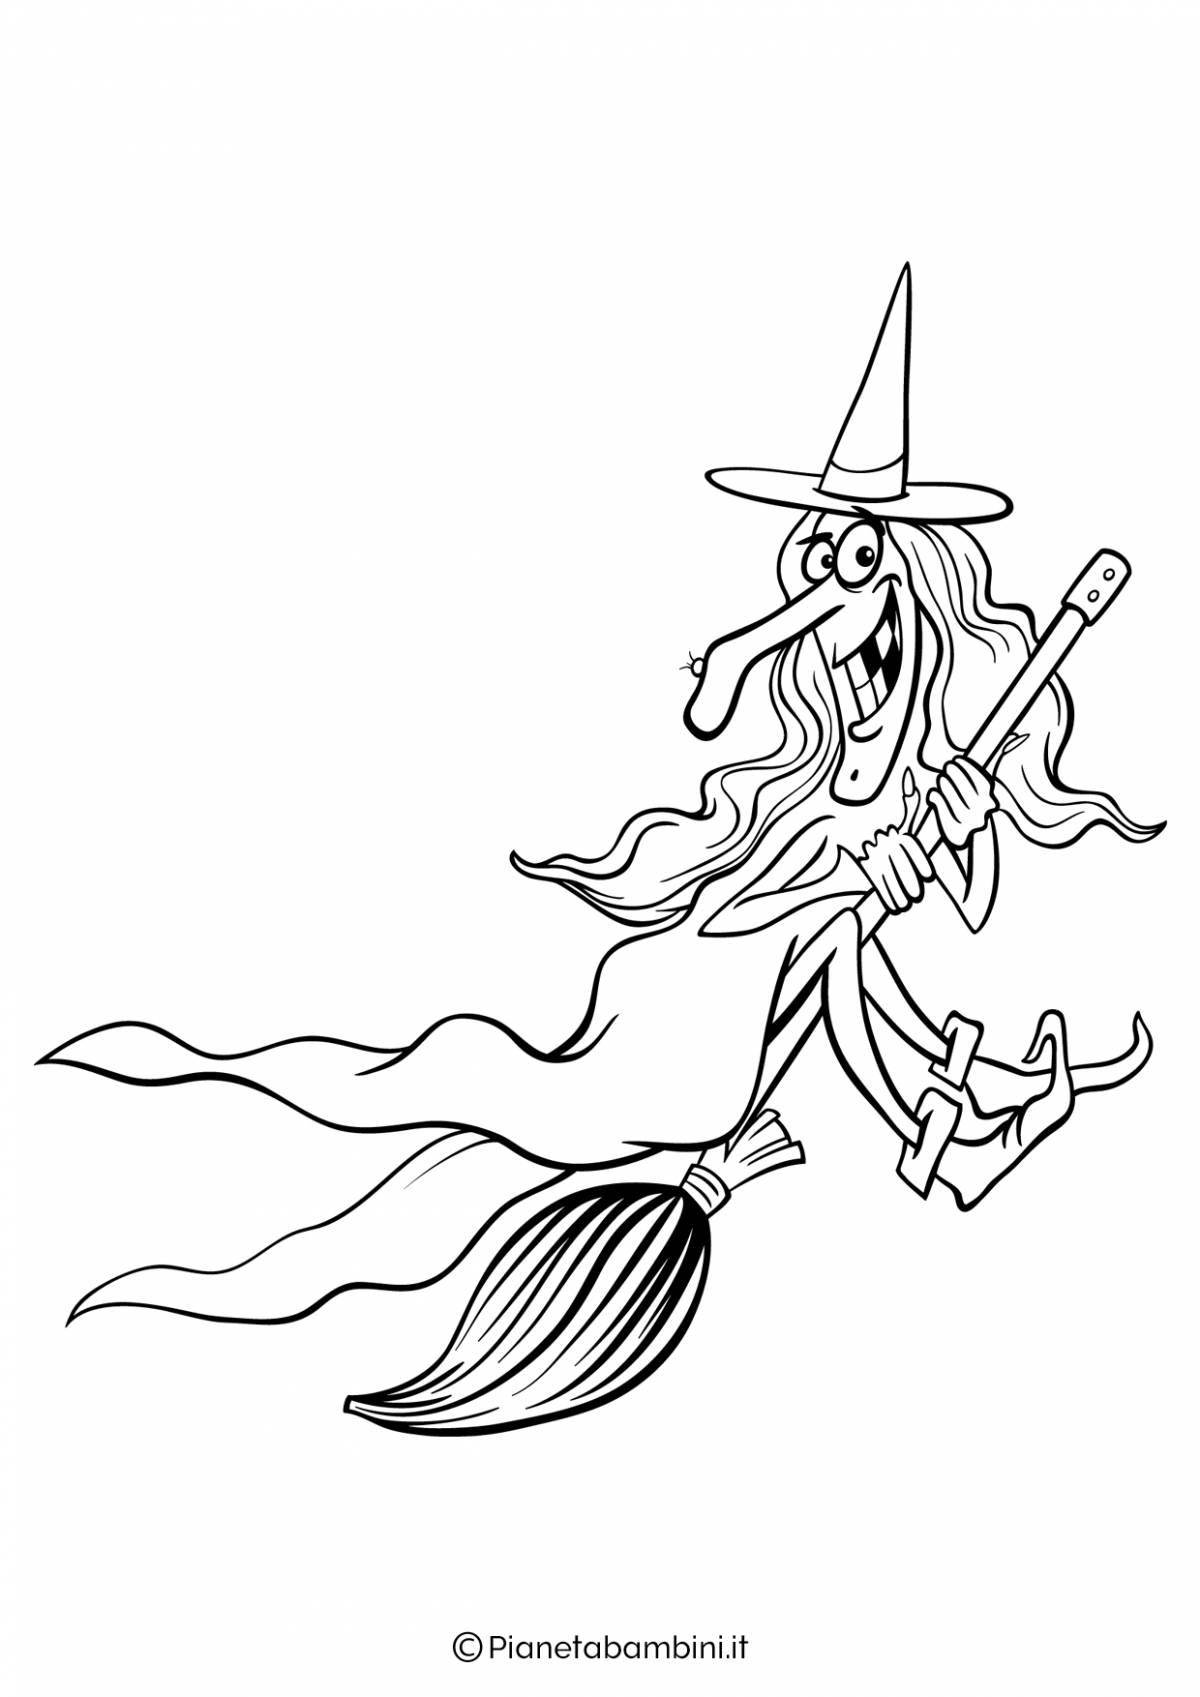 Inviting coloring pages of a witch from Slavic myths